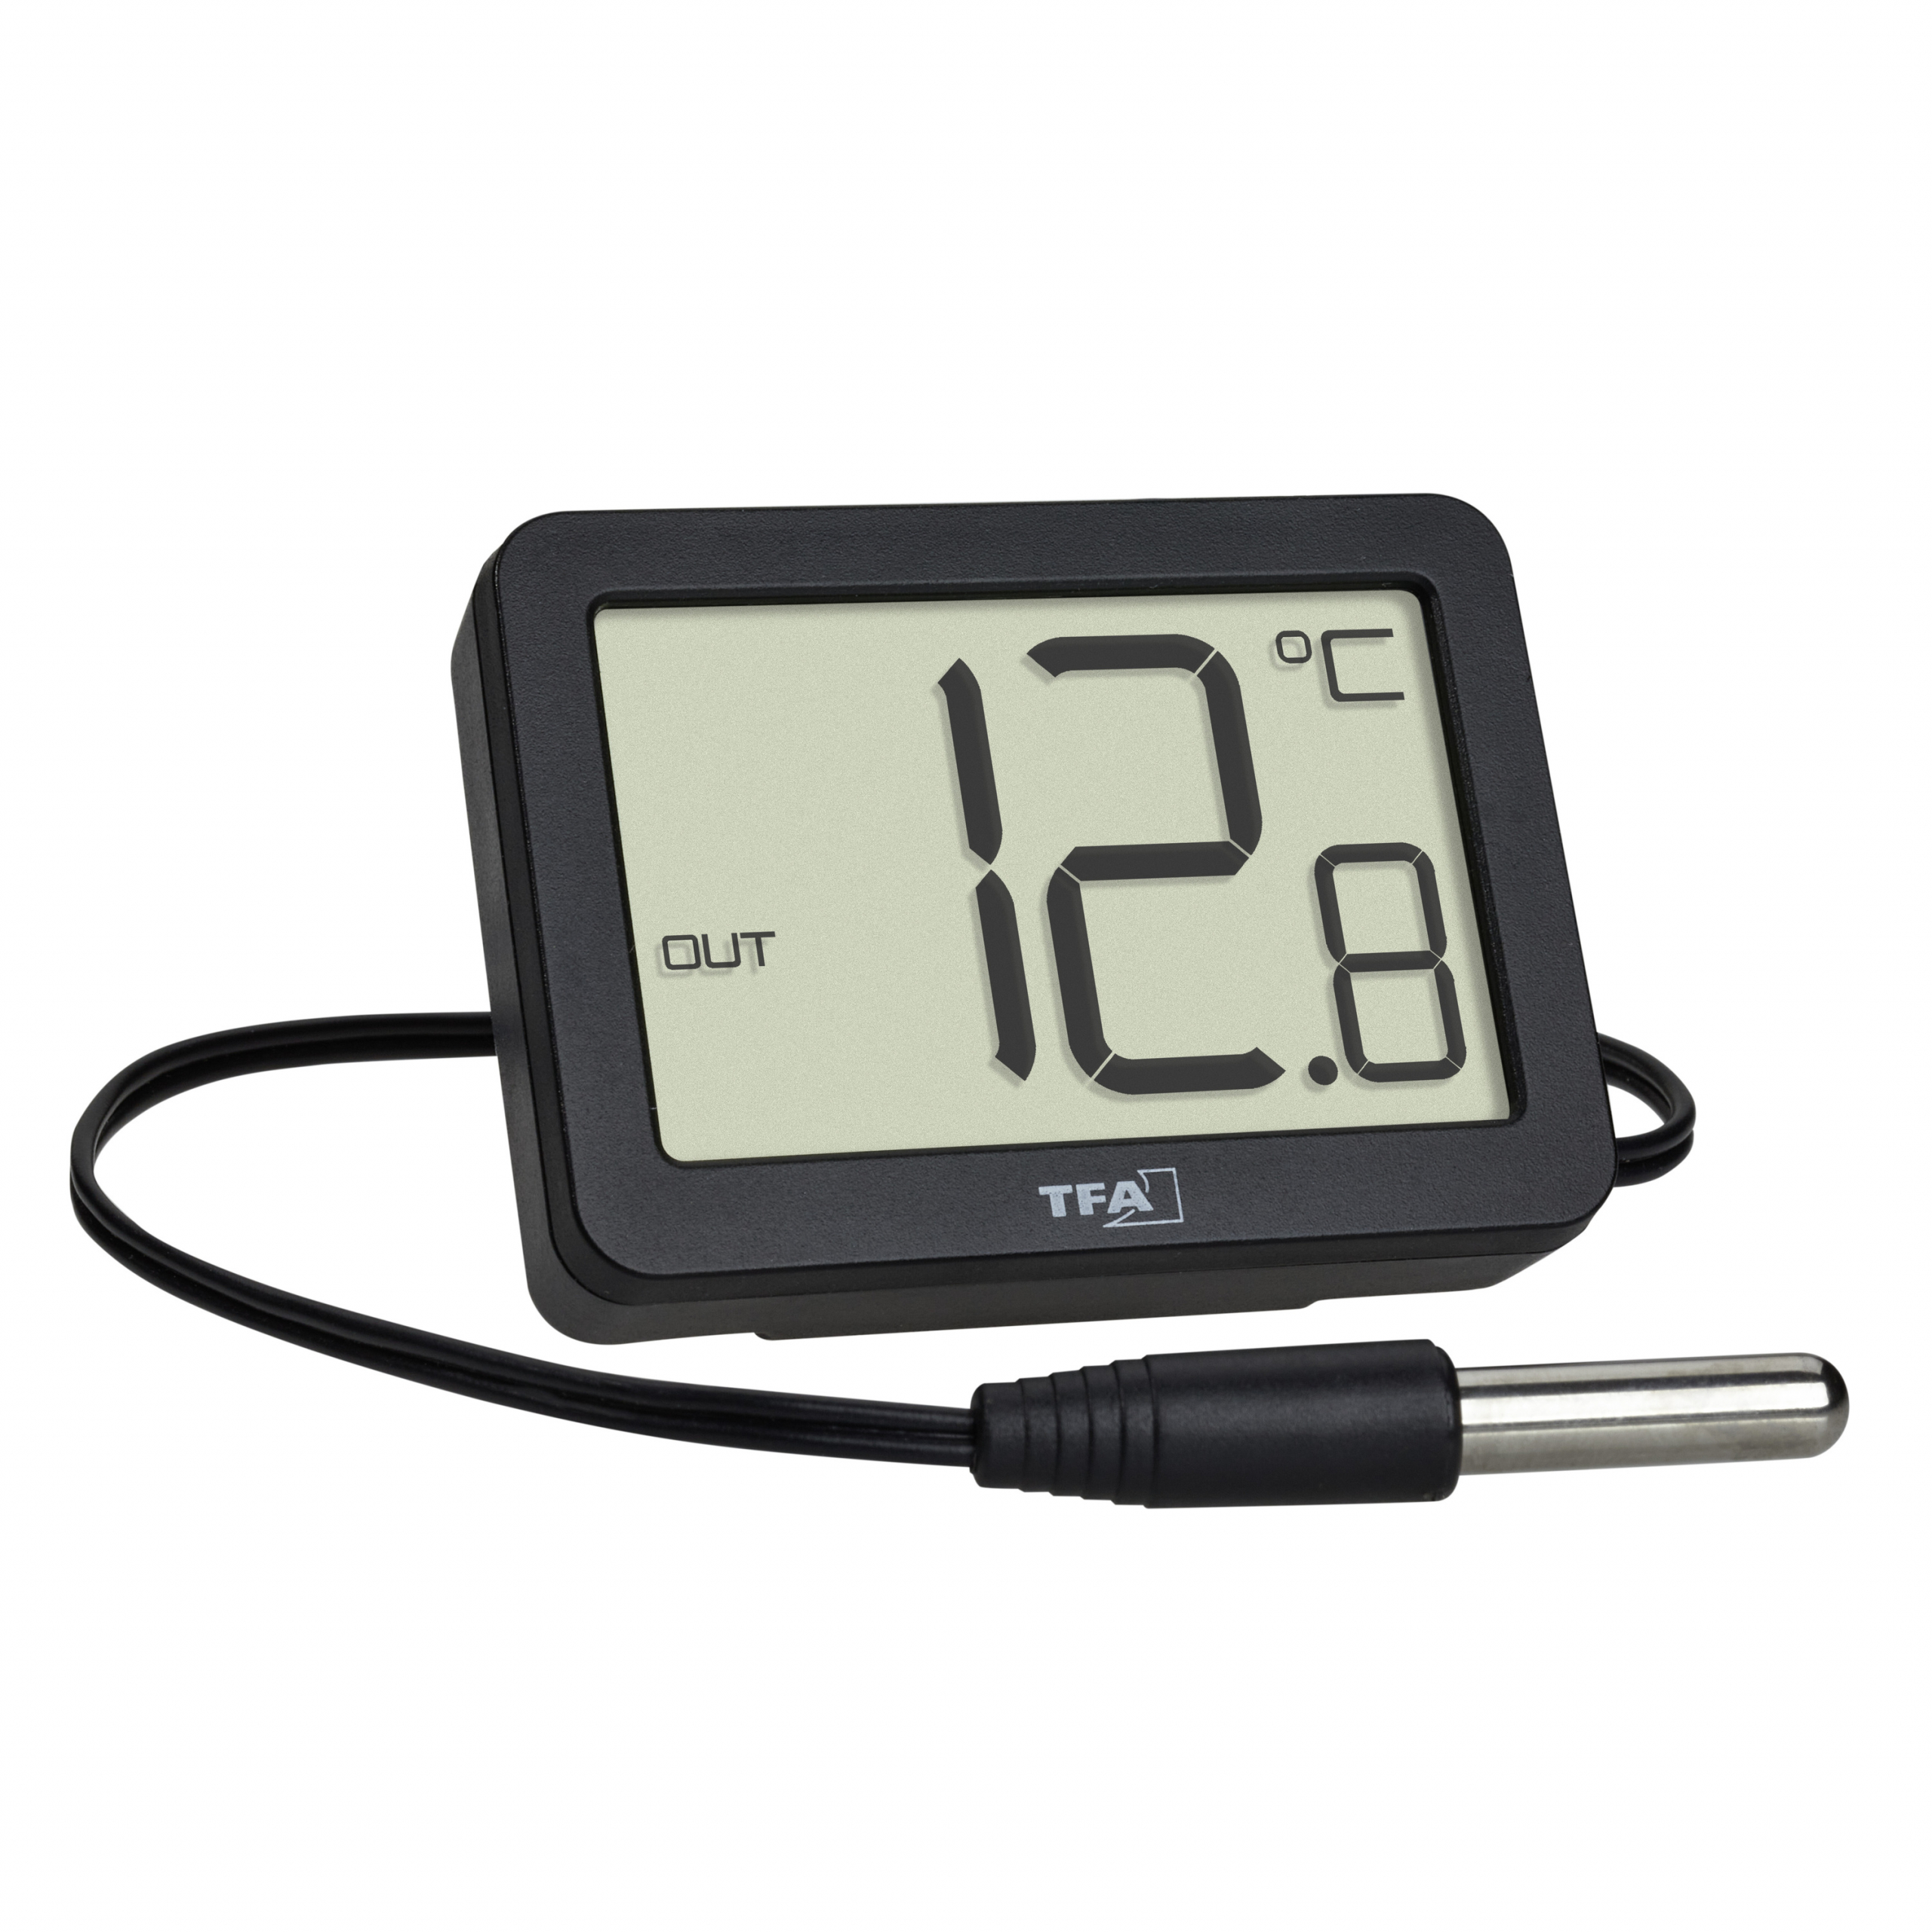 Analog Indoor/Outdoor Thermometer Hygrometer Temperature Humidity Meter 10 B